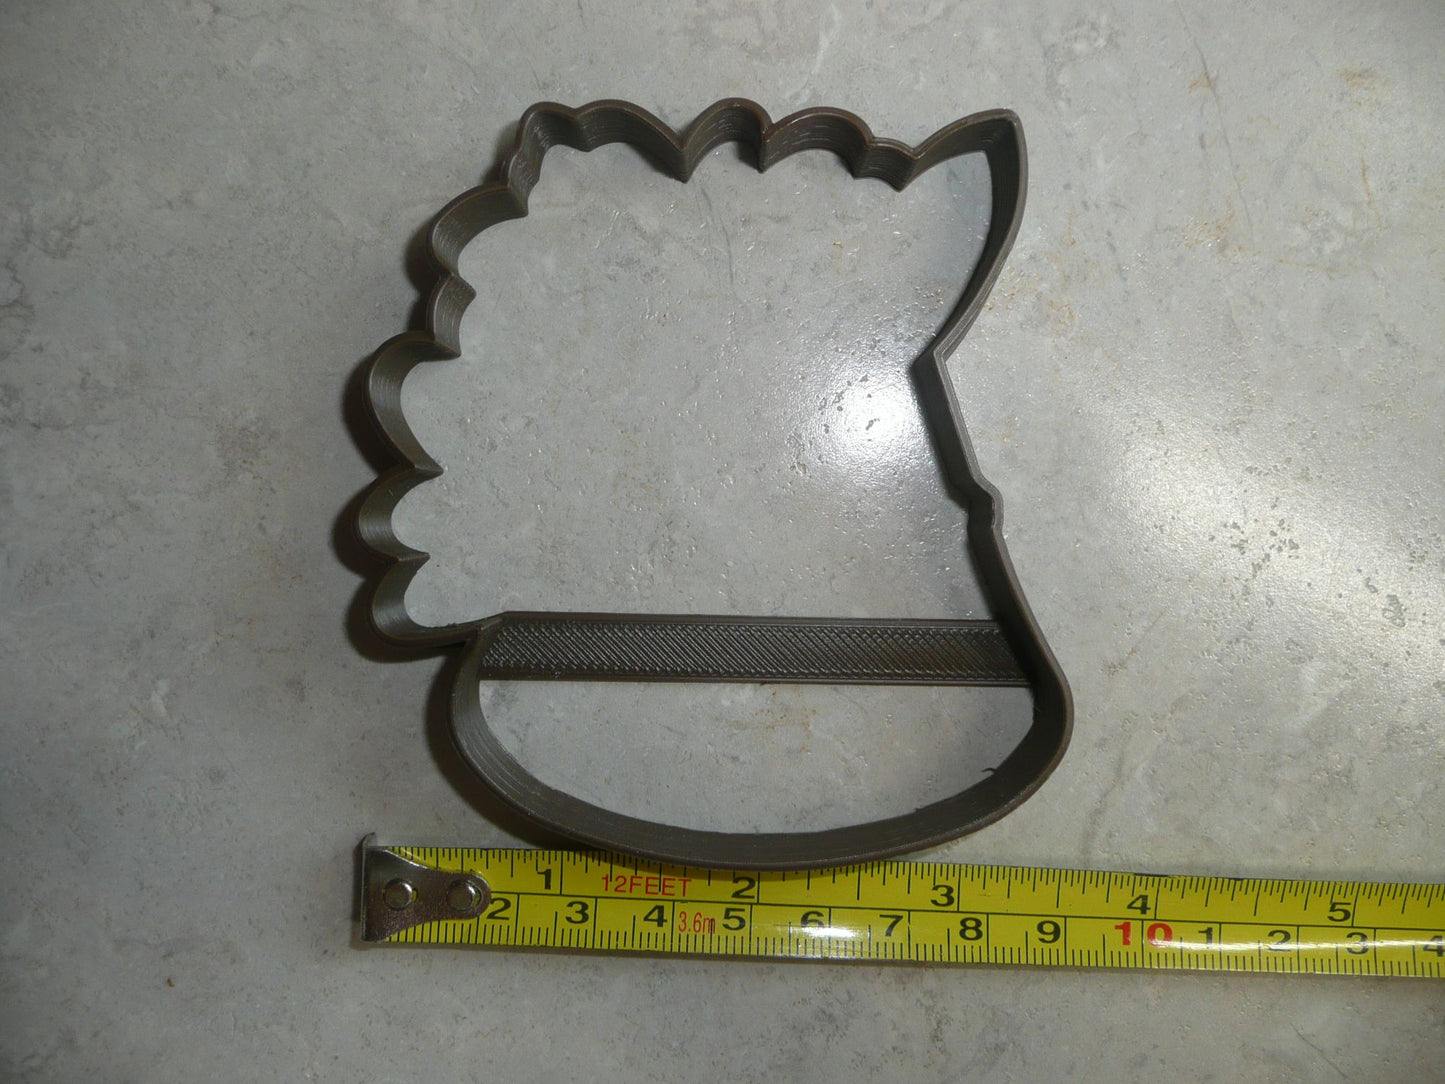 Horse Face Outline Equine Farm Animal Cookie Cutter Baking Tool USA PR3458